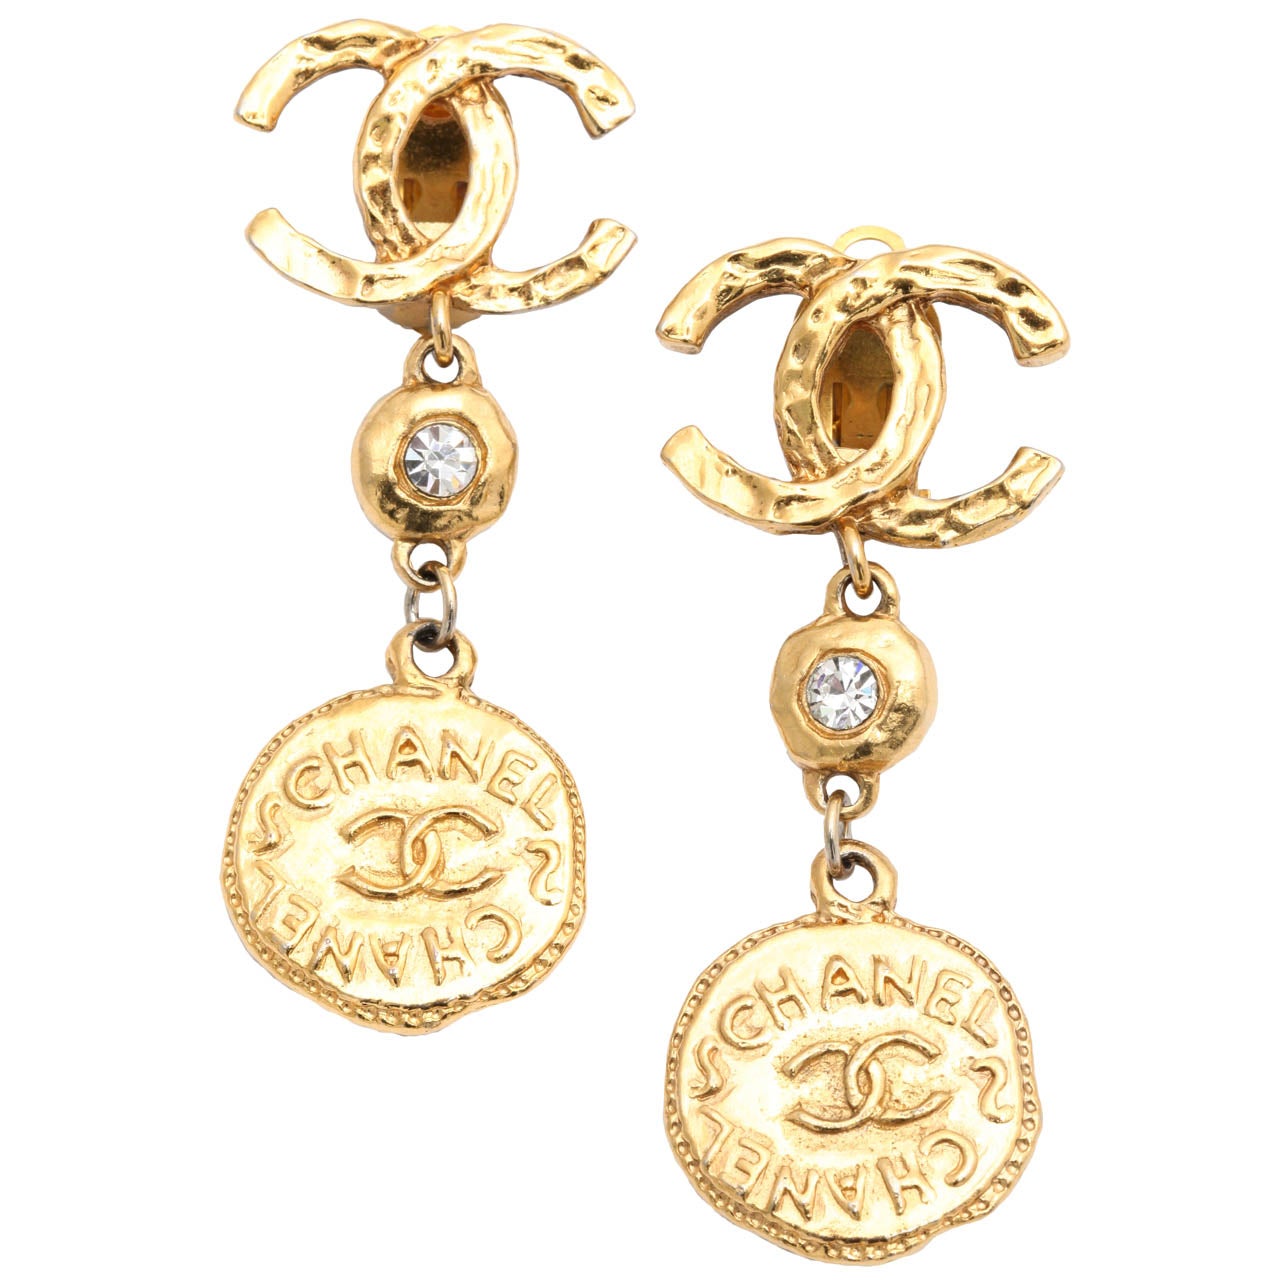 Chanel Long Coin Dangling Earrings with CC